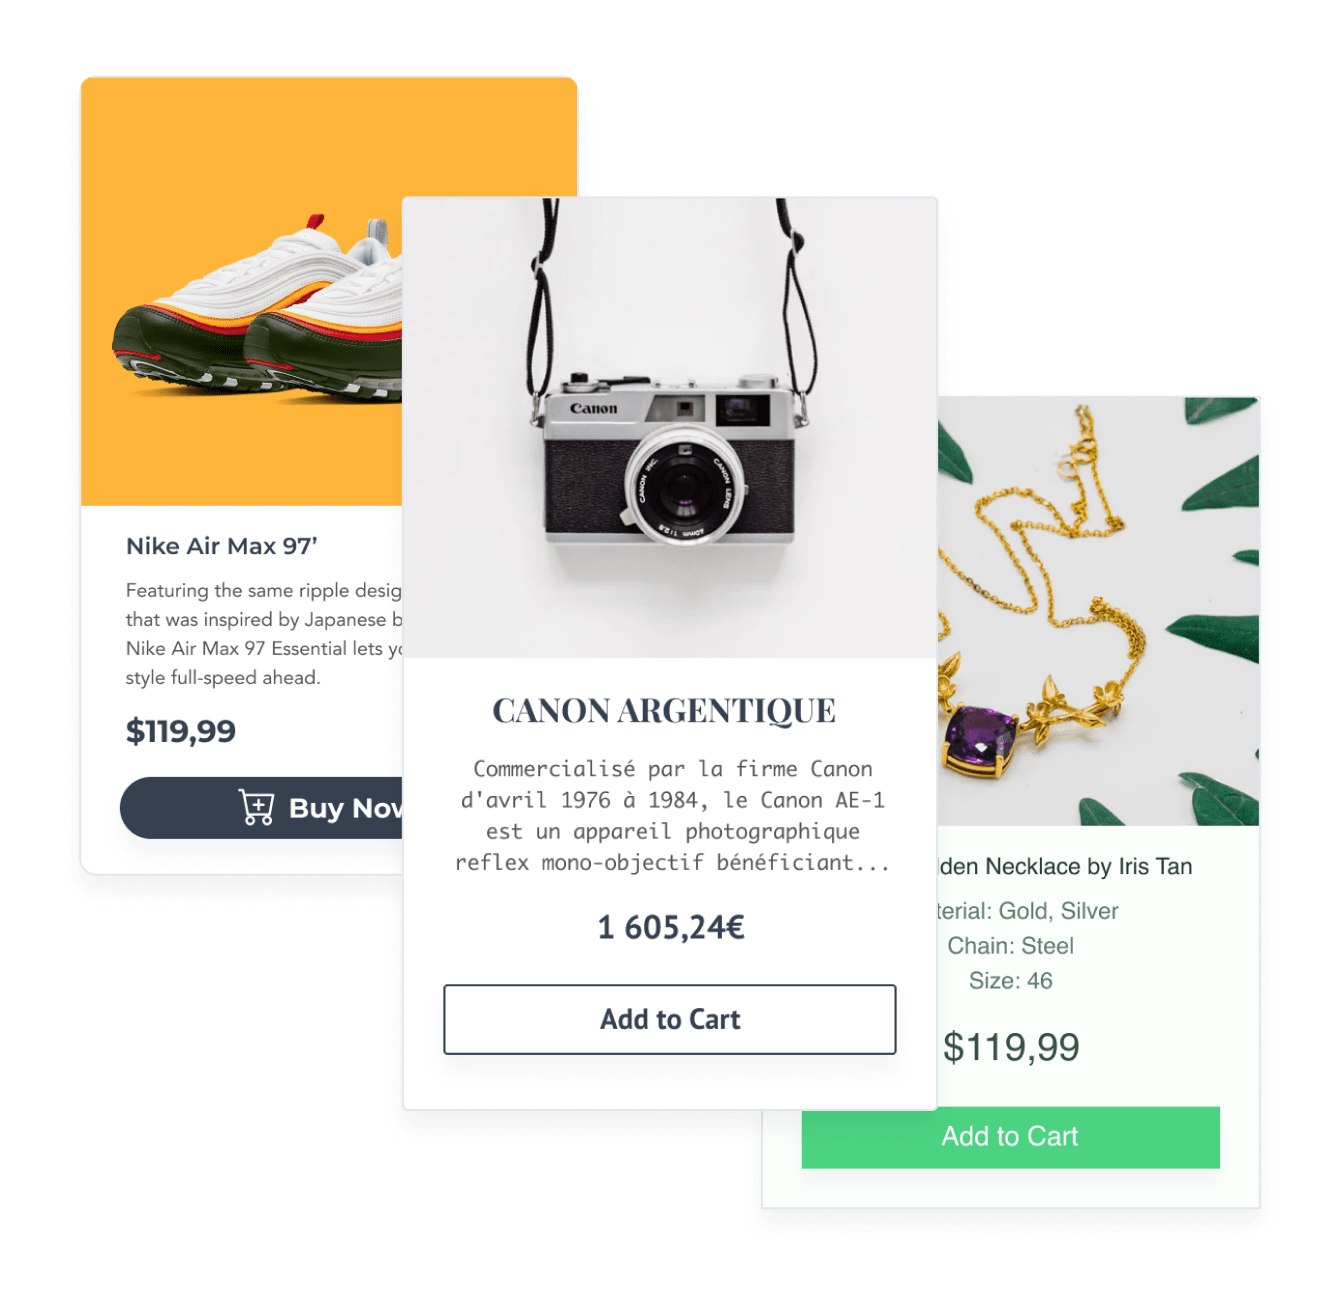 Product images with product information and an add to cart button created with POWR eCommerce.